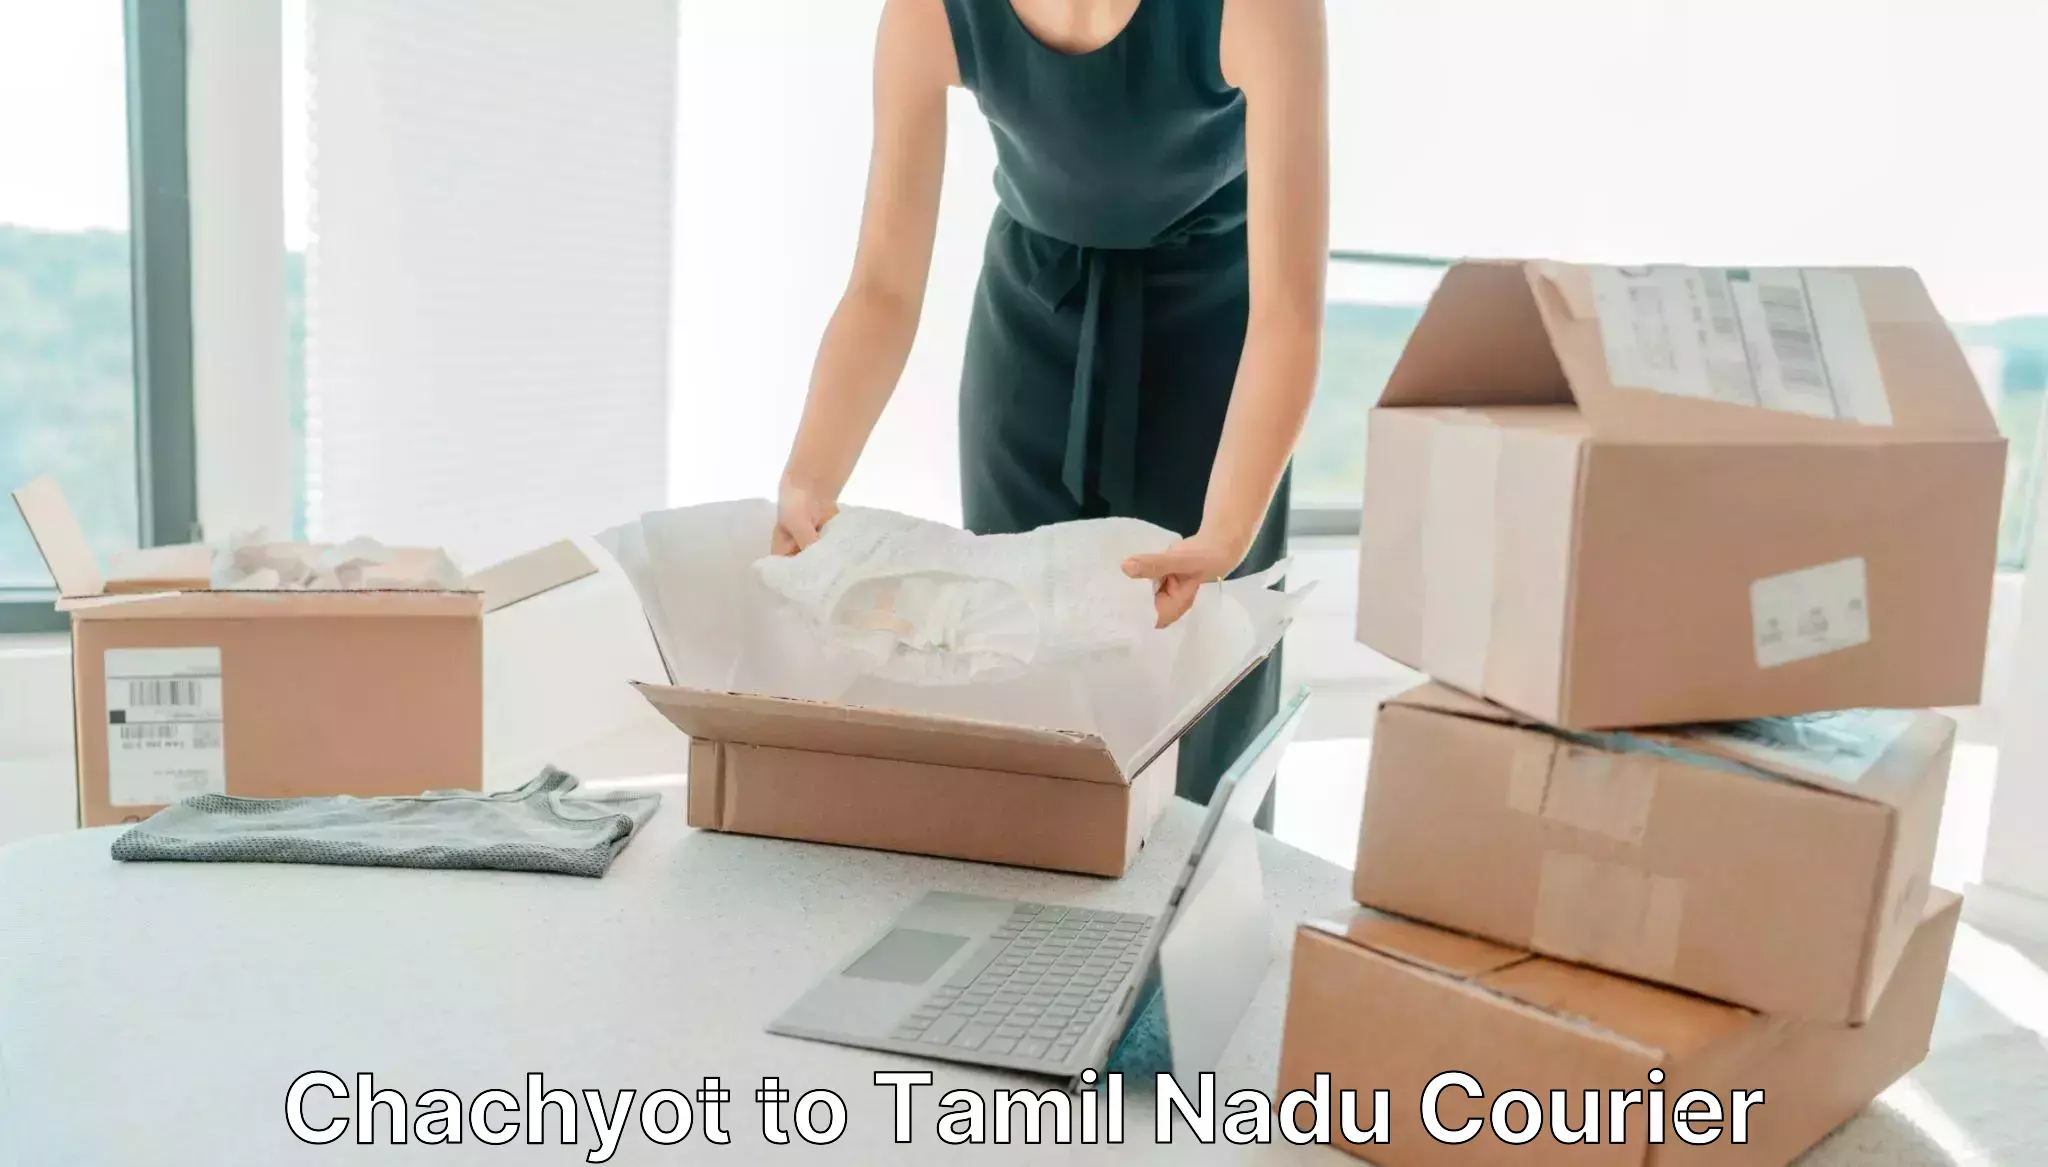 Express mail service Chachyot to Melur